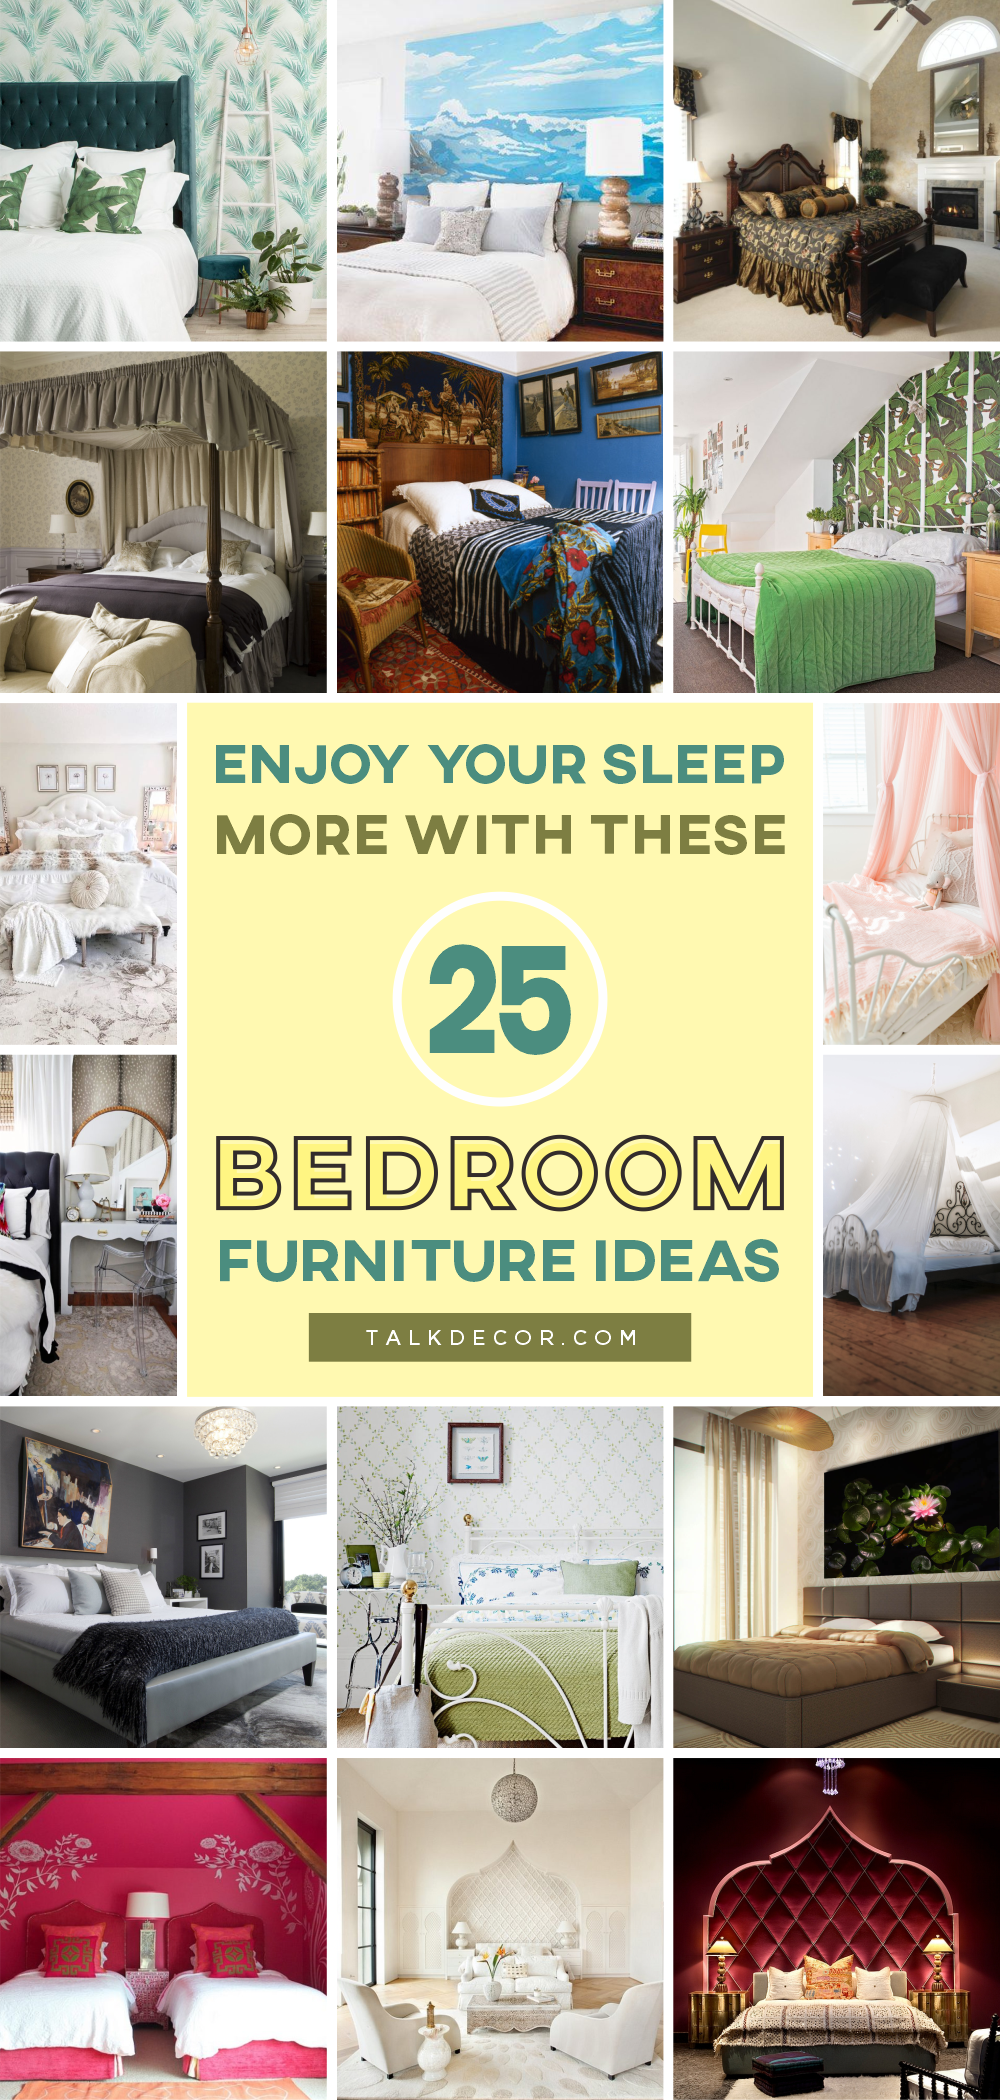 Enjoy Your Sleep More with These 25 Bedroom Furniture Ideas - Talkdecor